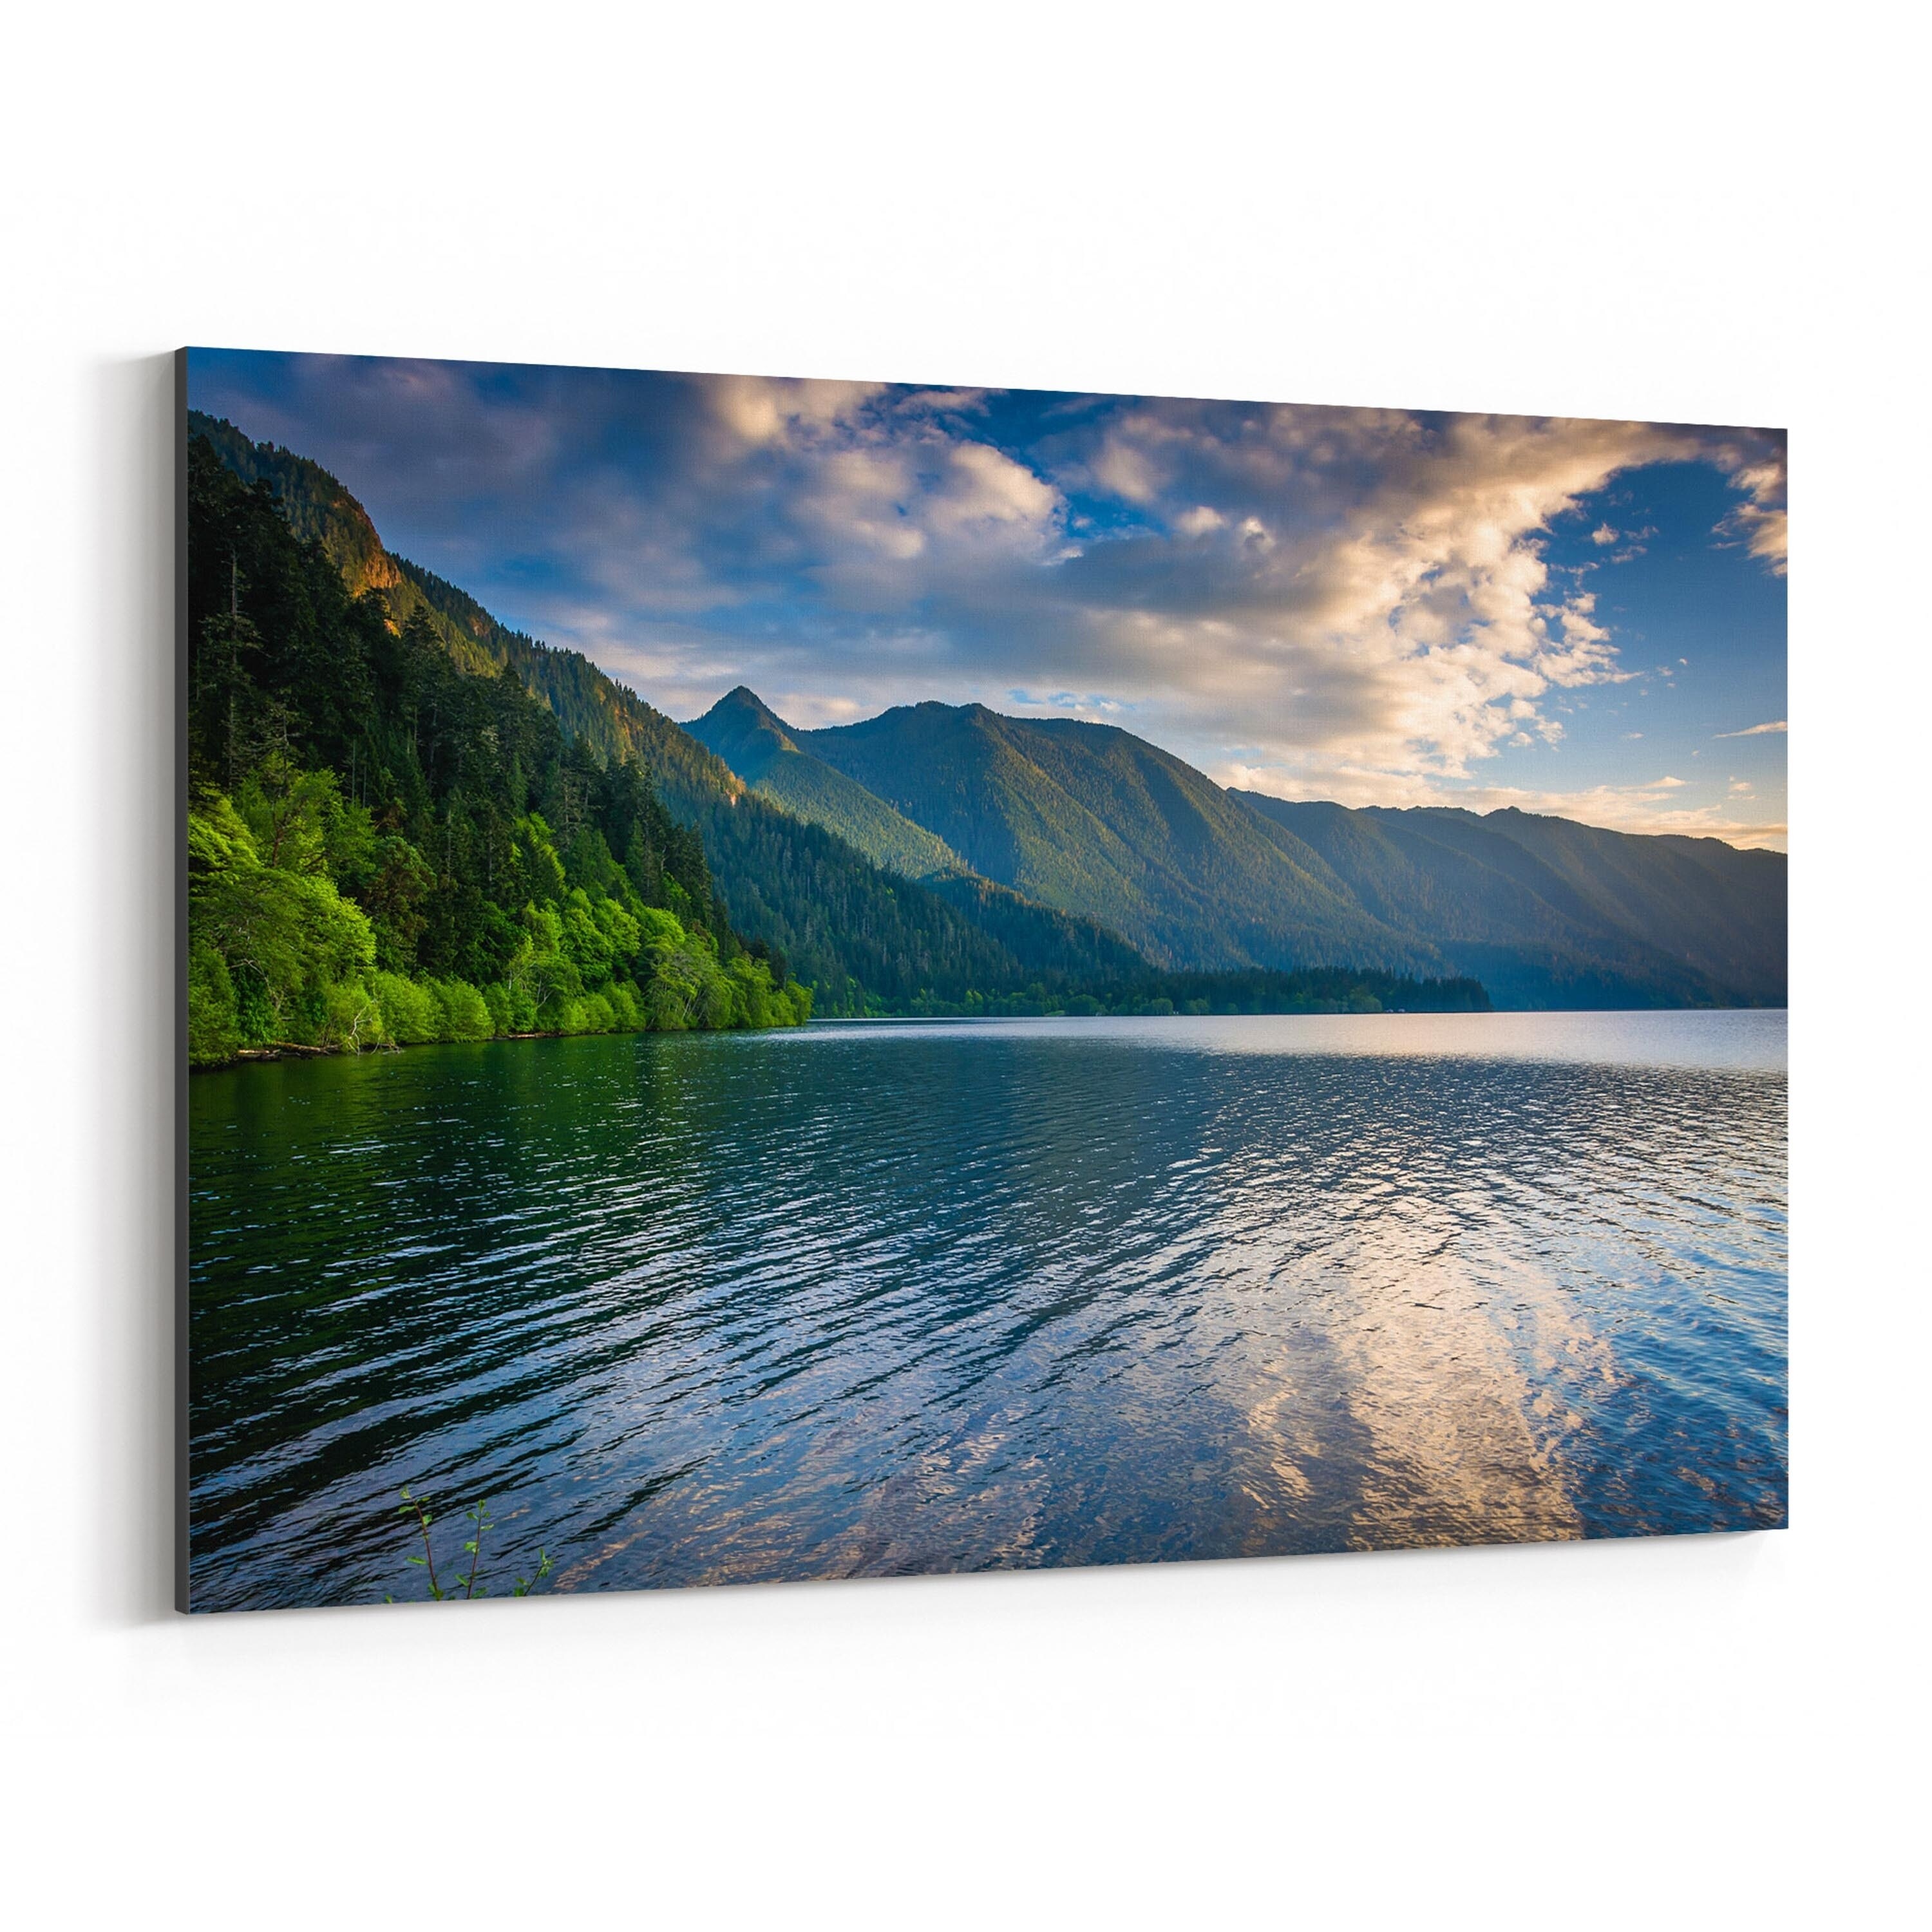 Noir Gallery Olympic Park Lake Mountains Canvas Wall Art Print